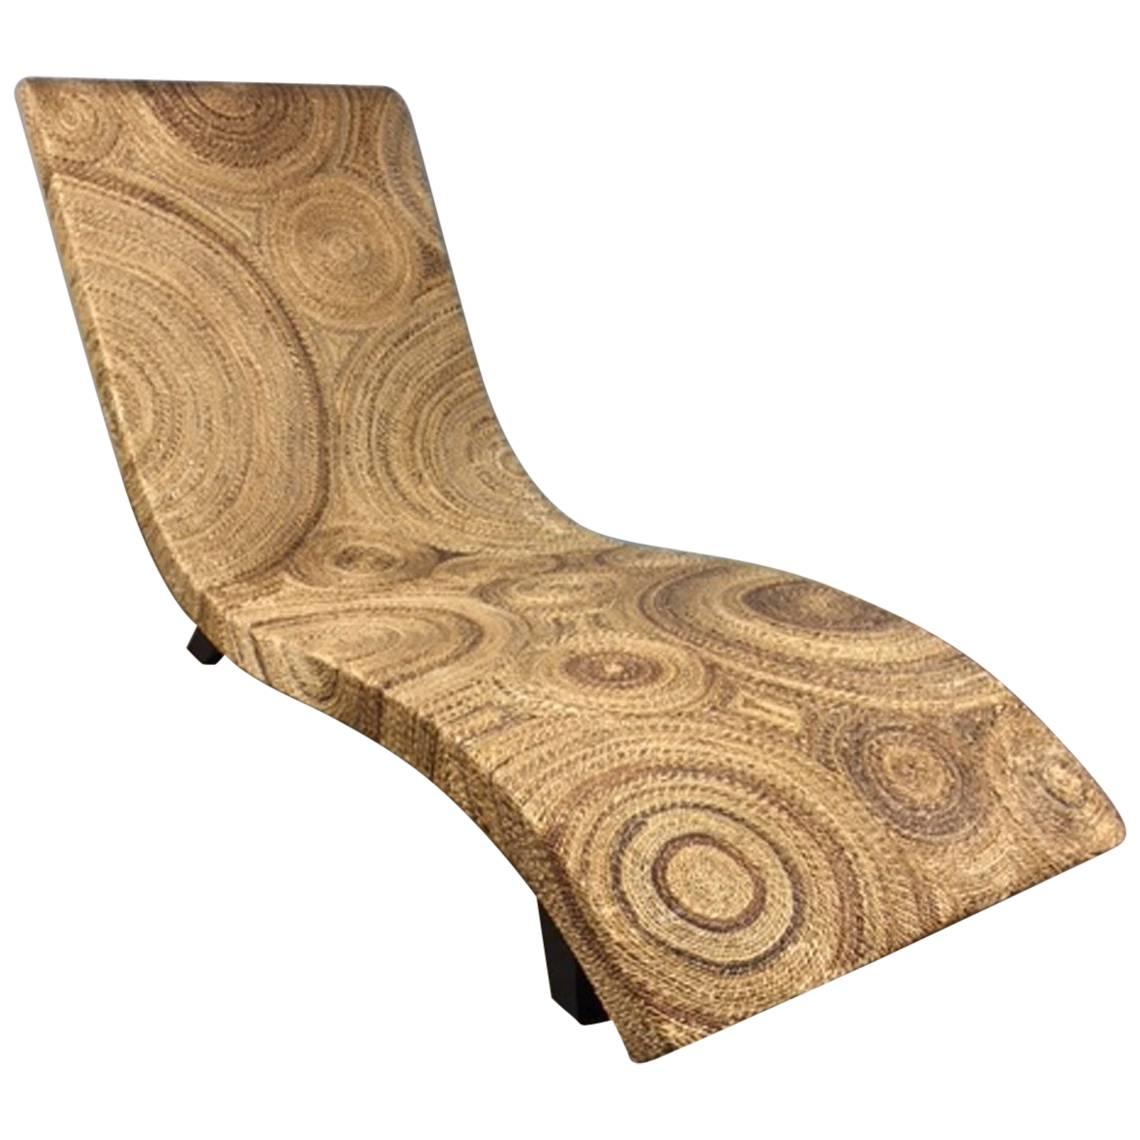 Twine Wrapped Chaise Lounge Chair